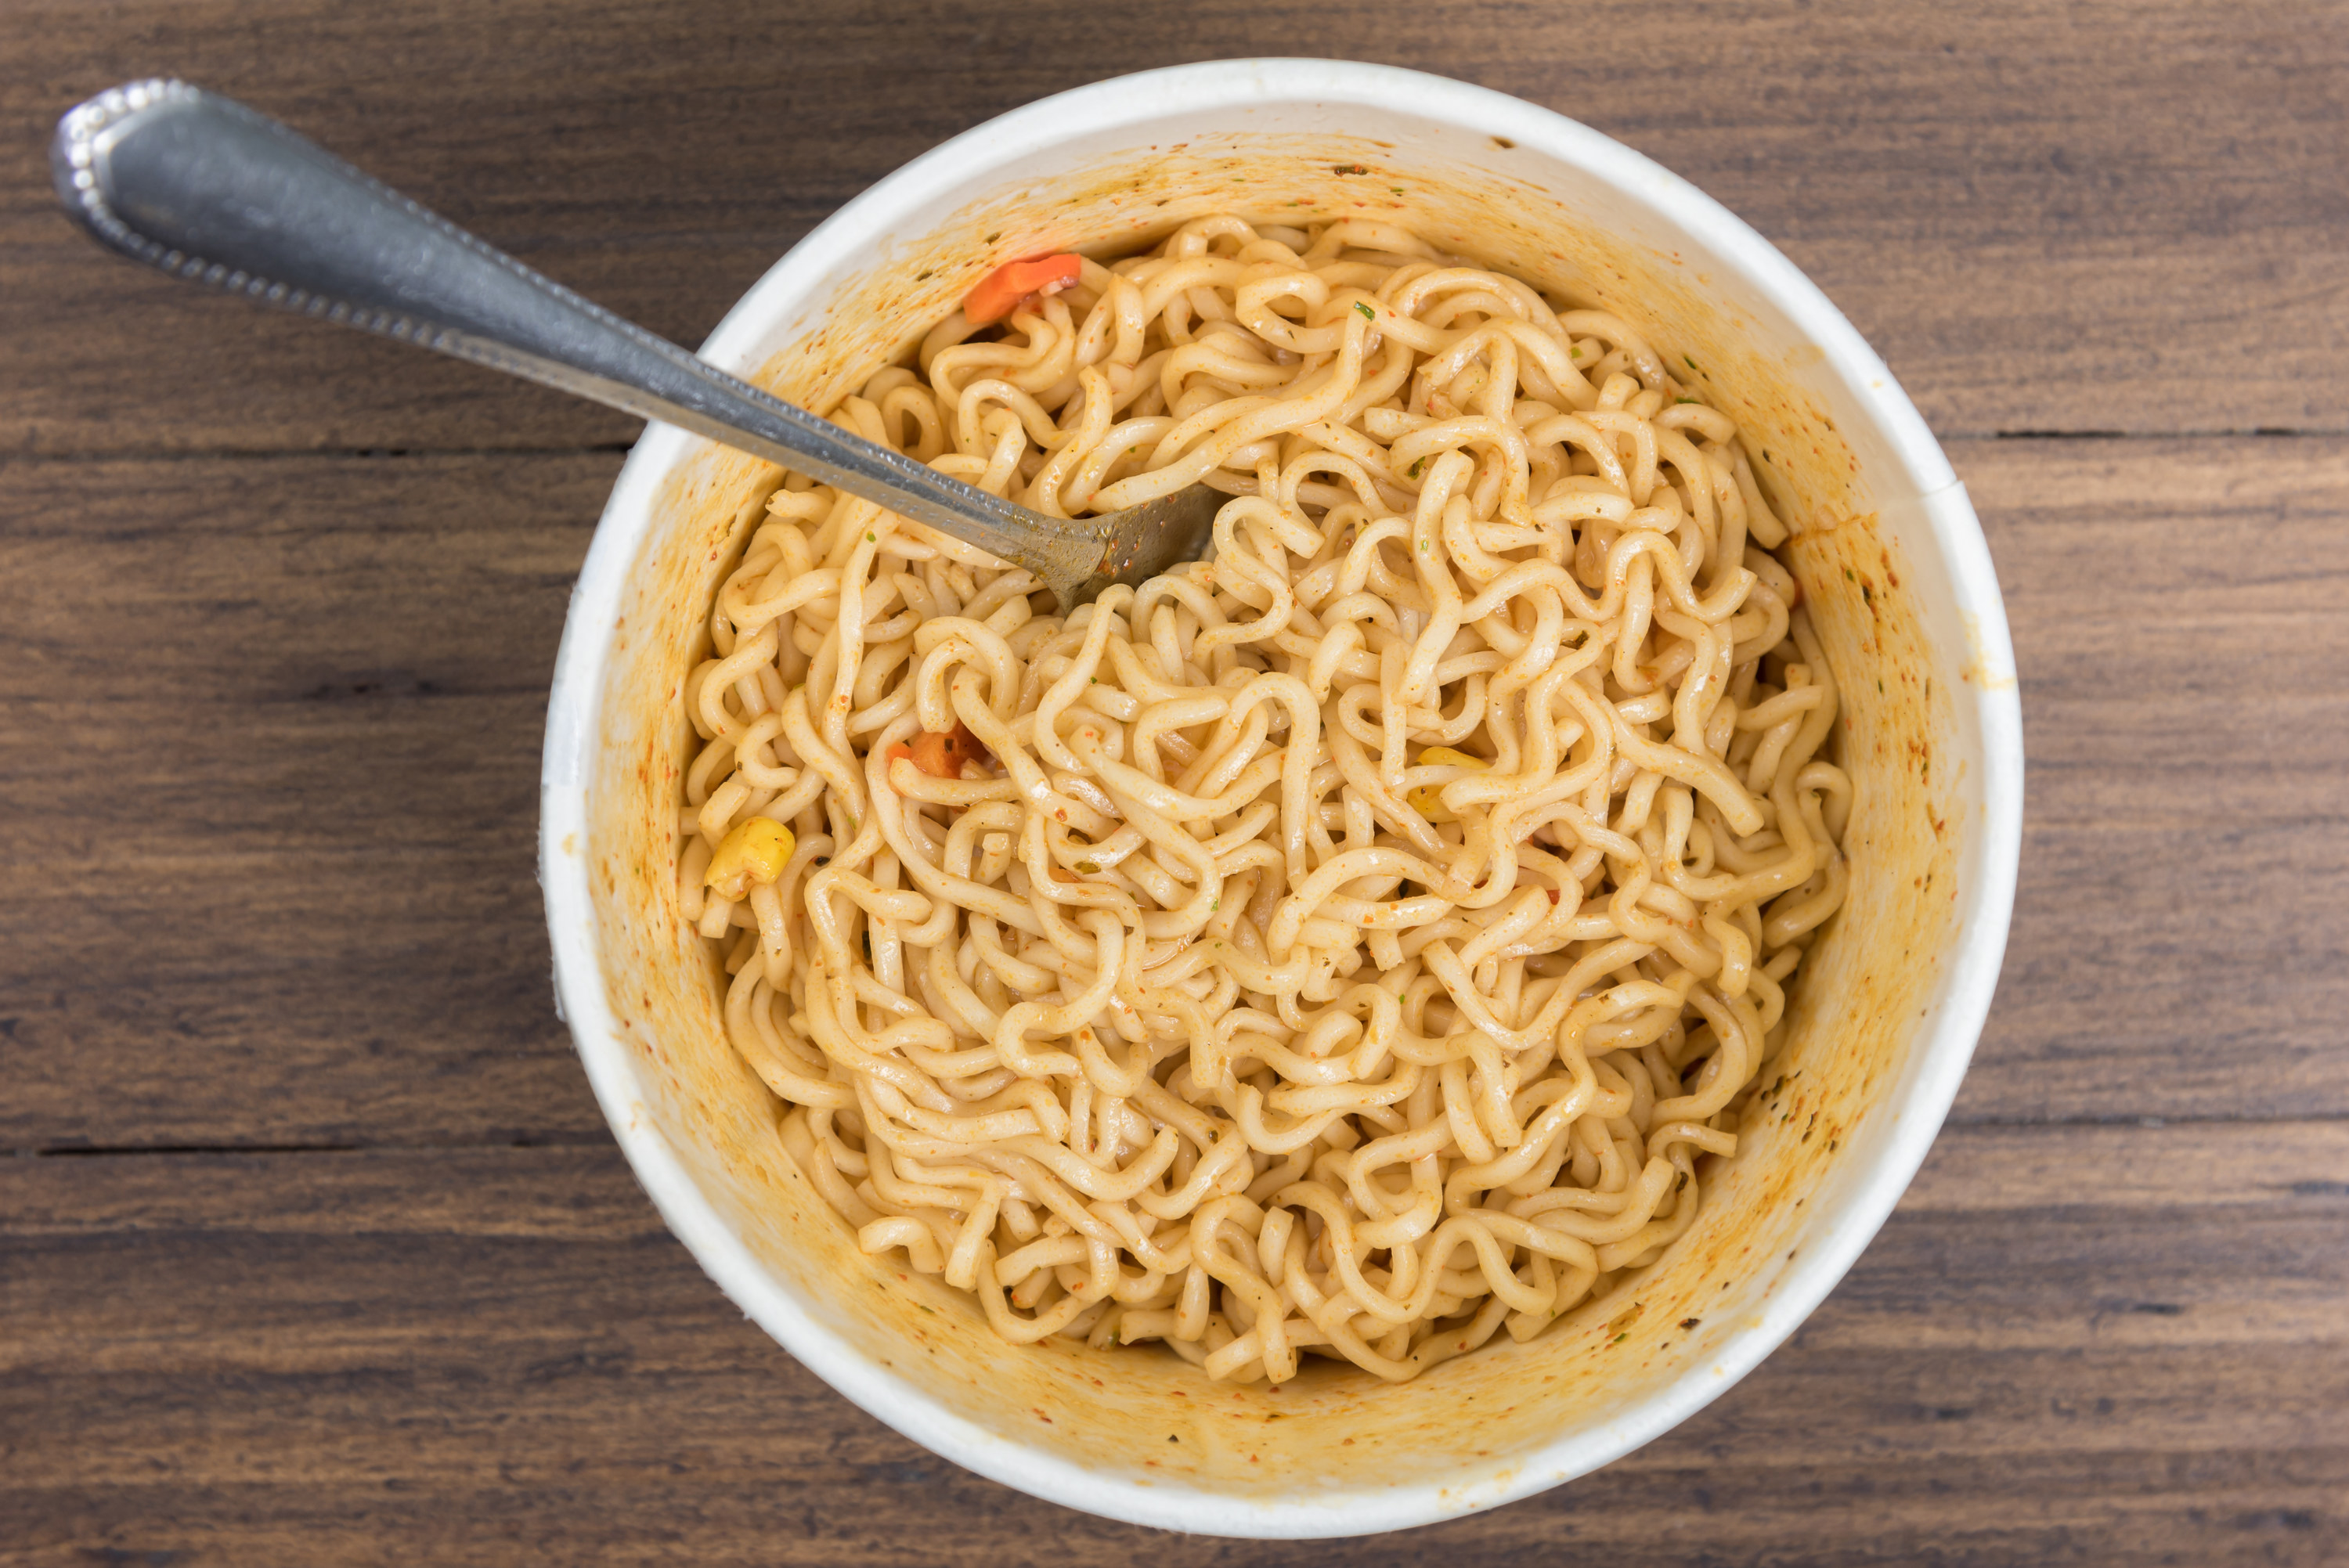 A cooked cup of instant ramen